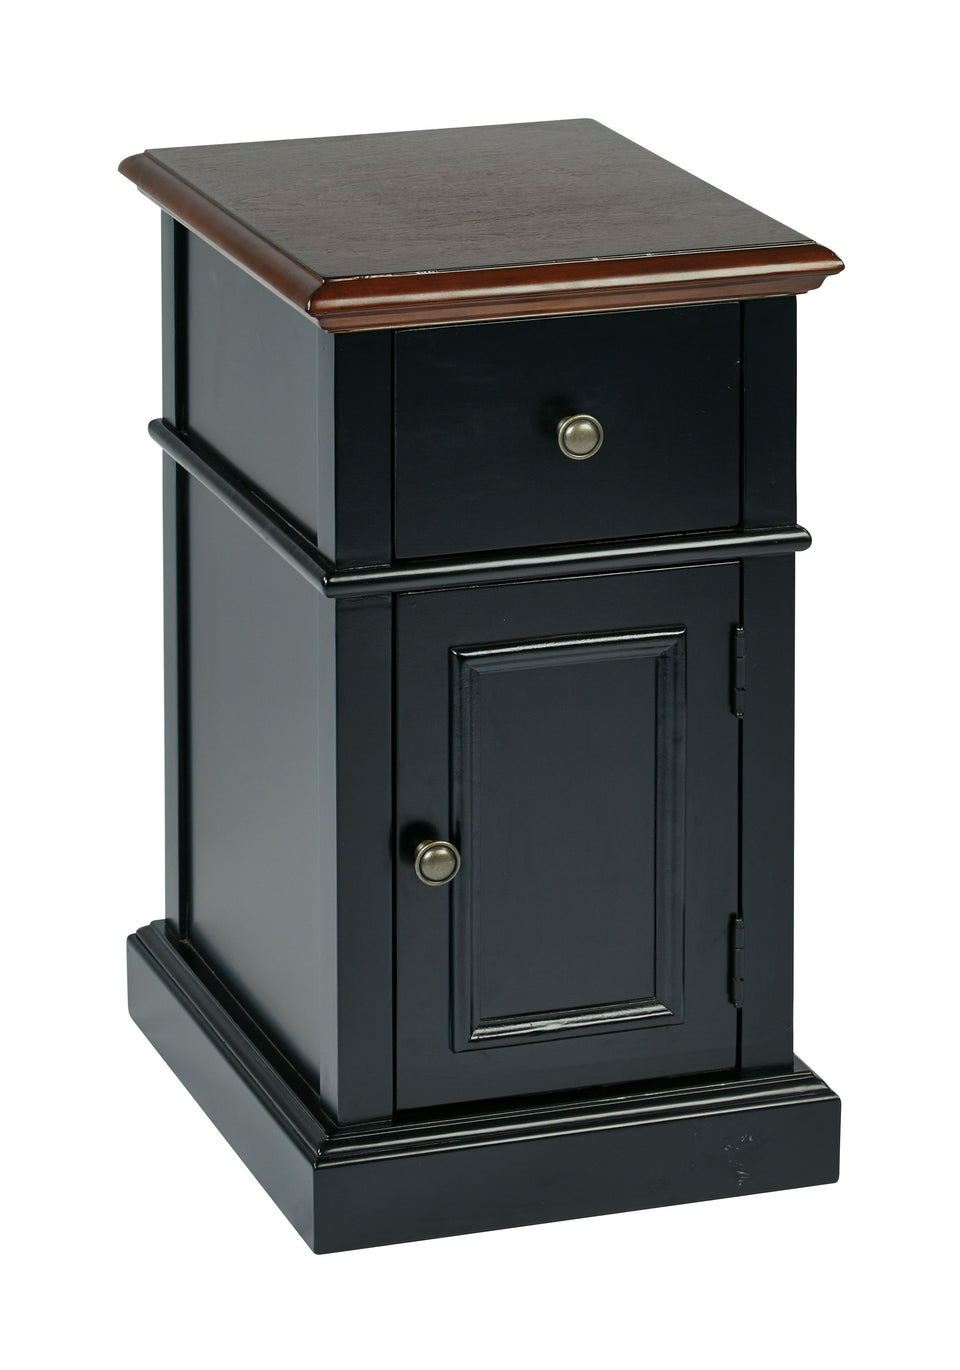 oxford two tone walnut and blalck side table with single drawer and door with metal knob closed